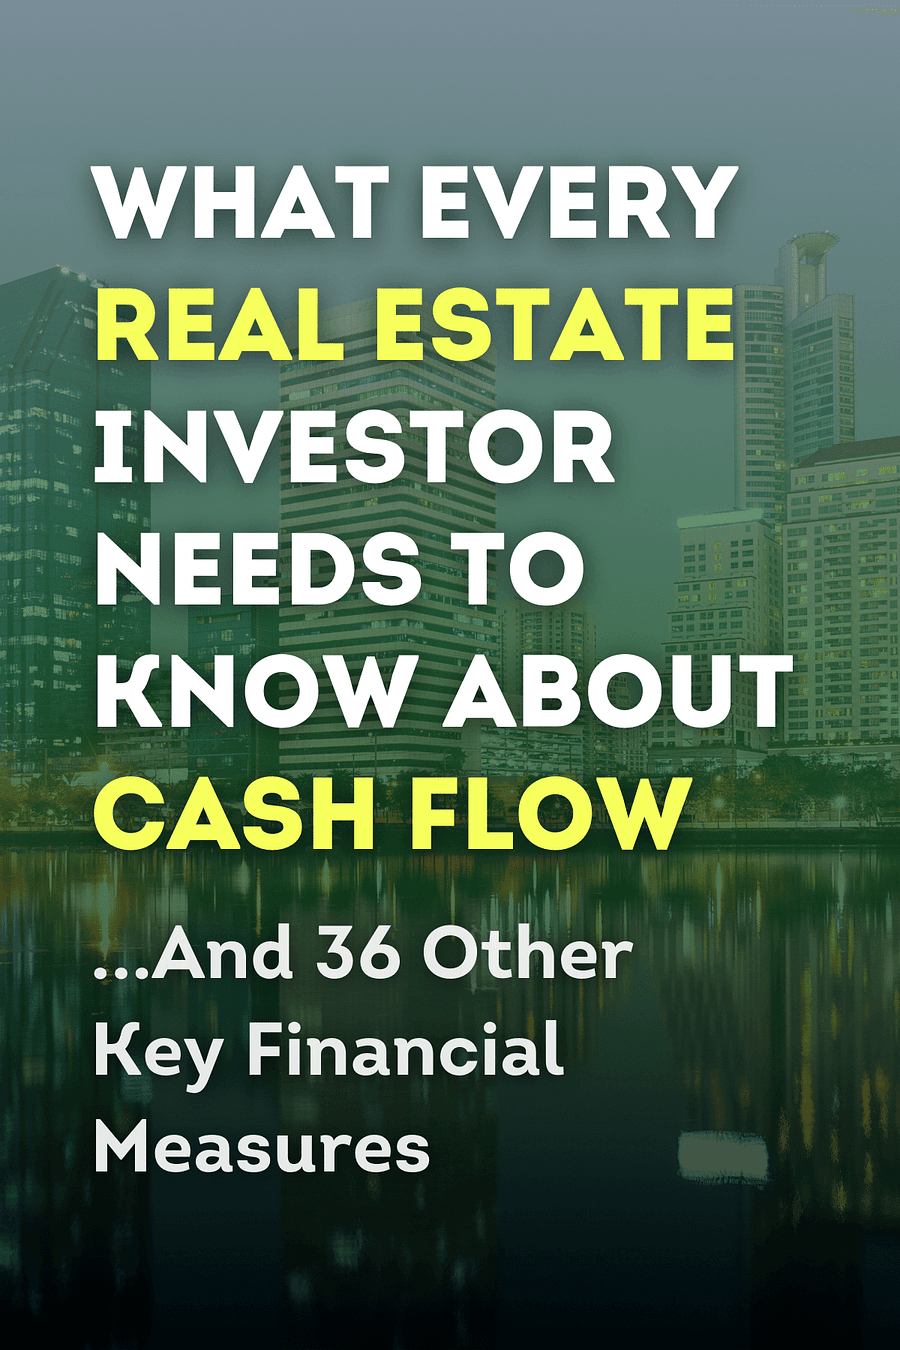 What Every Real Estate Investor Needs to Know About Cash Flow... And 36 Other Key Financial Measures, Updated Edition by Frank Gallinelli - Book Summary